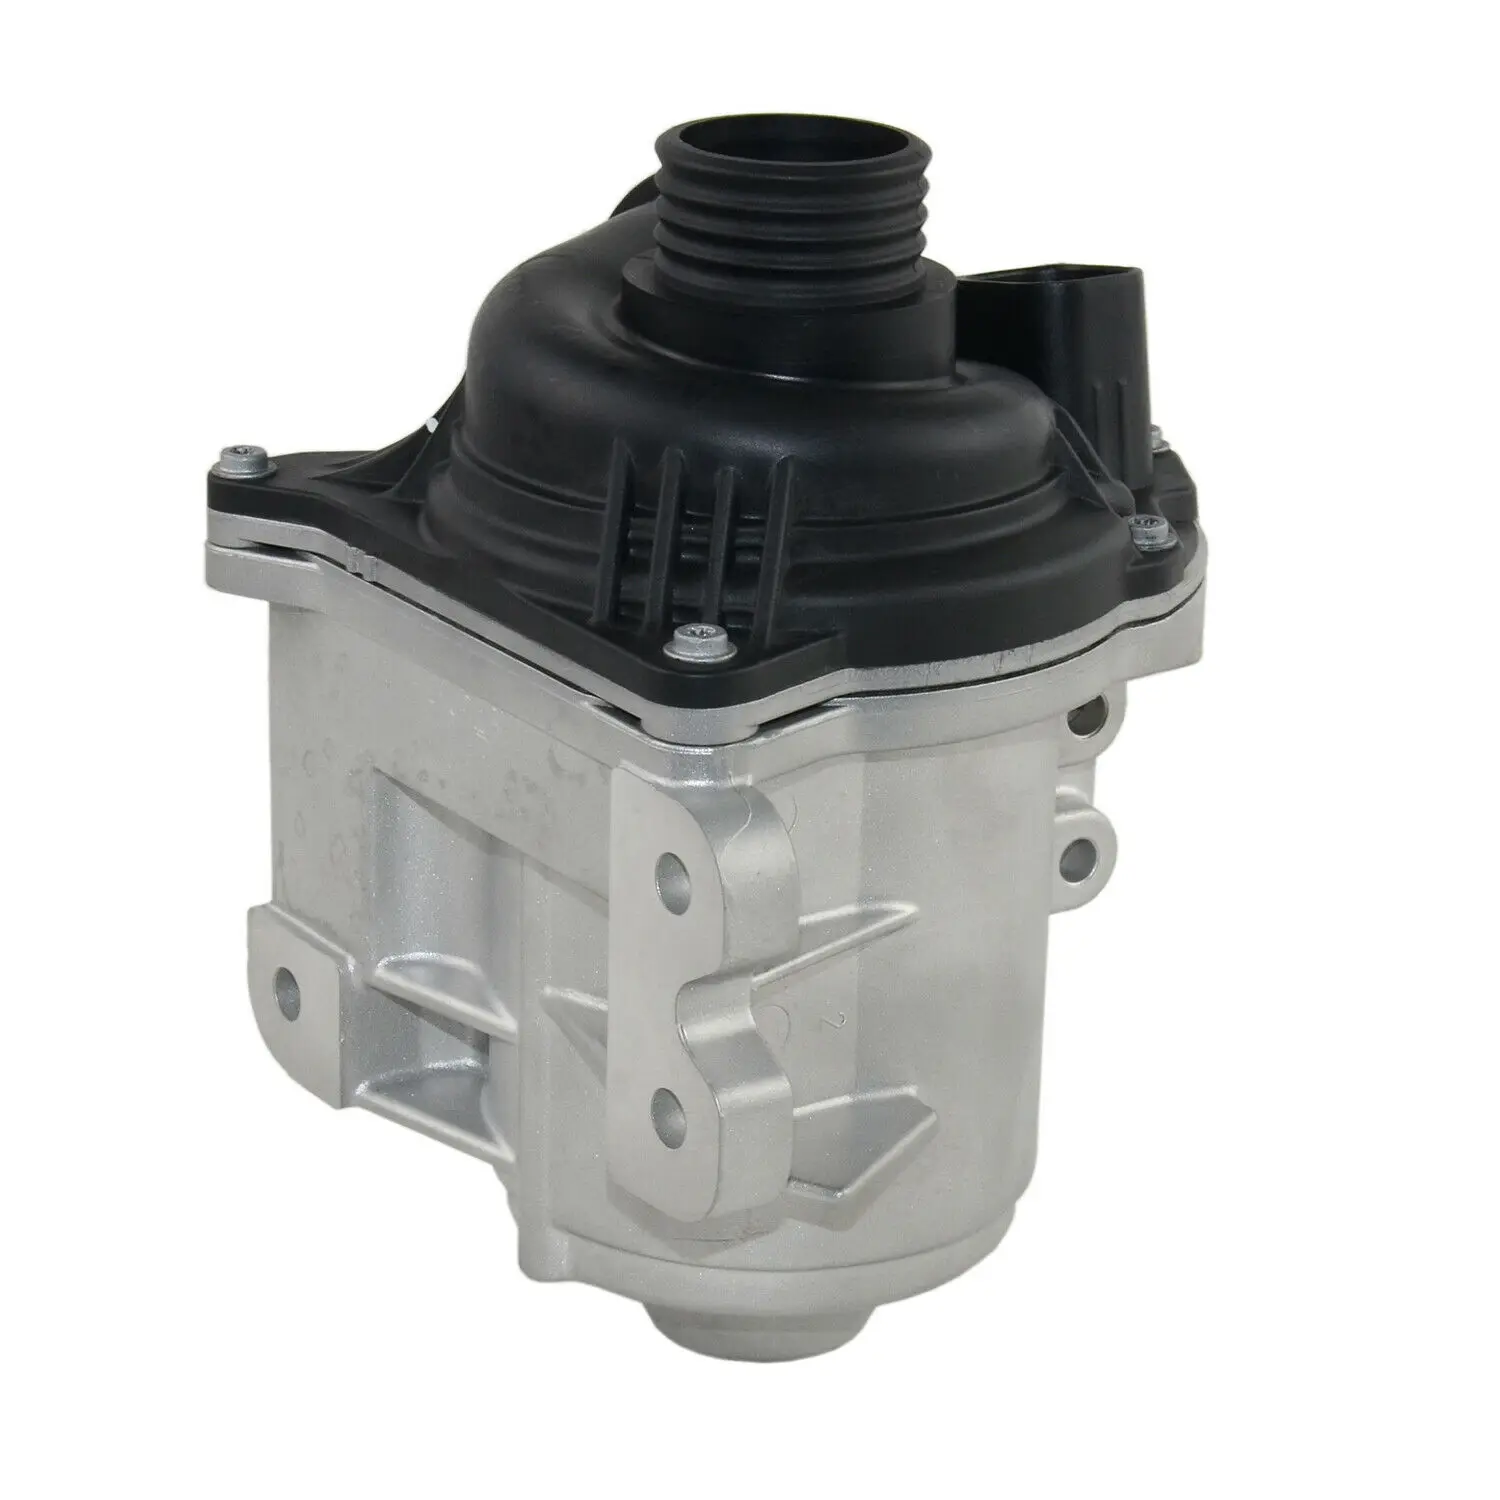 

Electric Water Pump For 135i 335i 335d 740 X3 X5 A2C59514607 11517632426